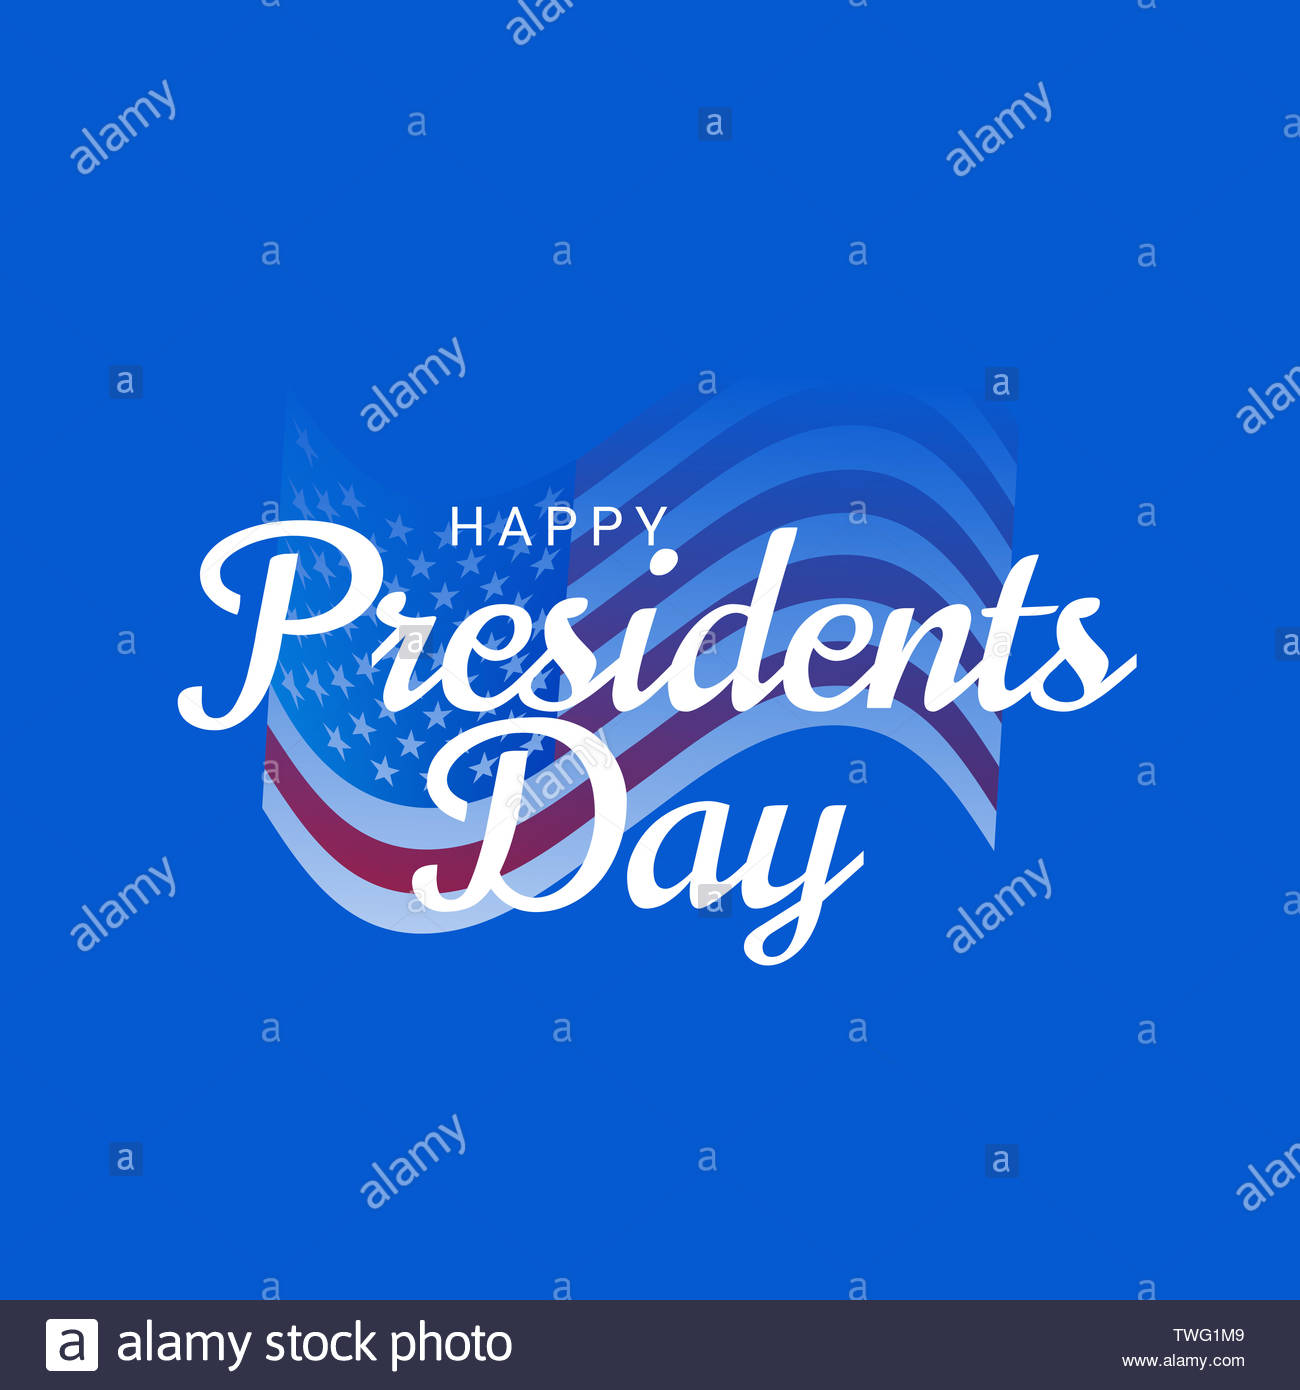 Happy Presidents Day Background Template Stock Photo